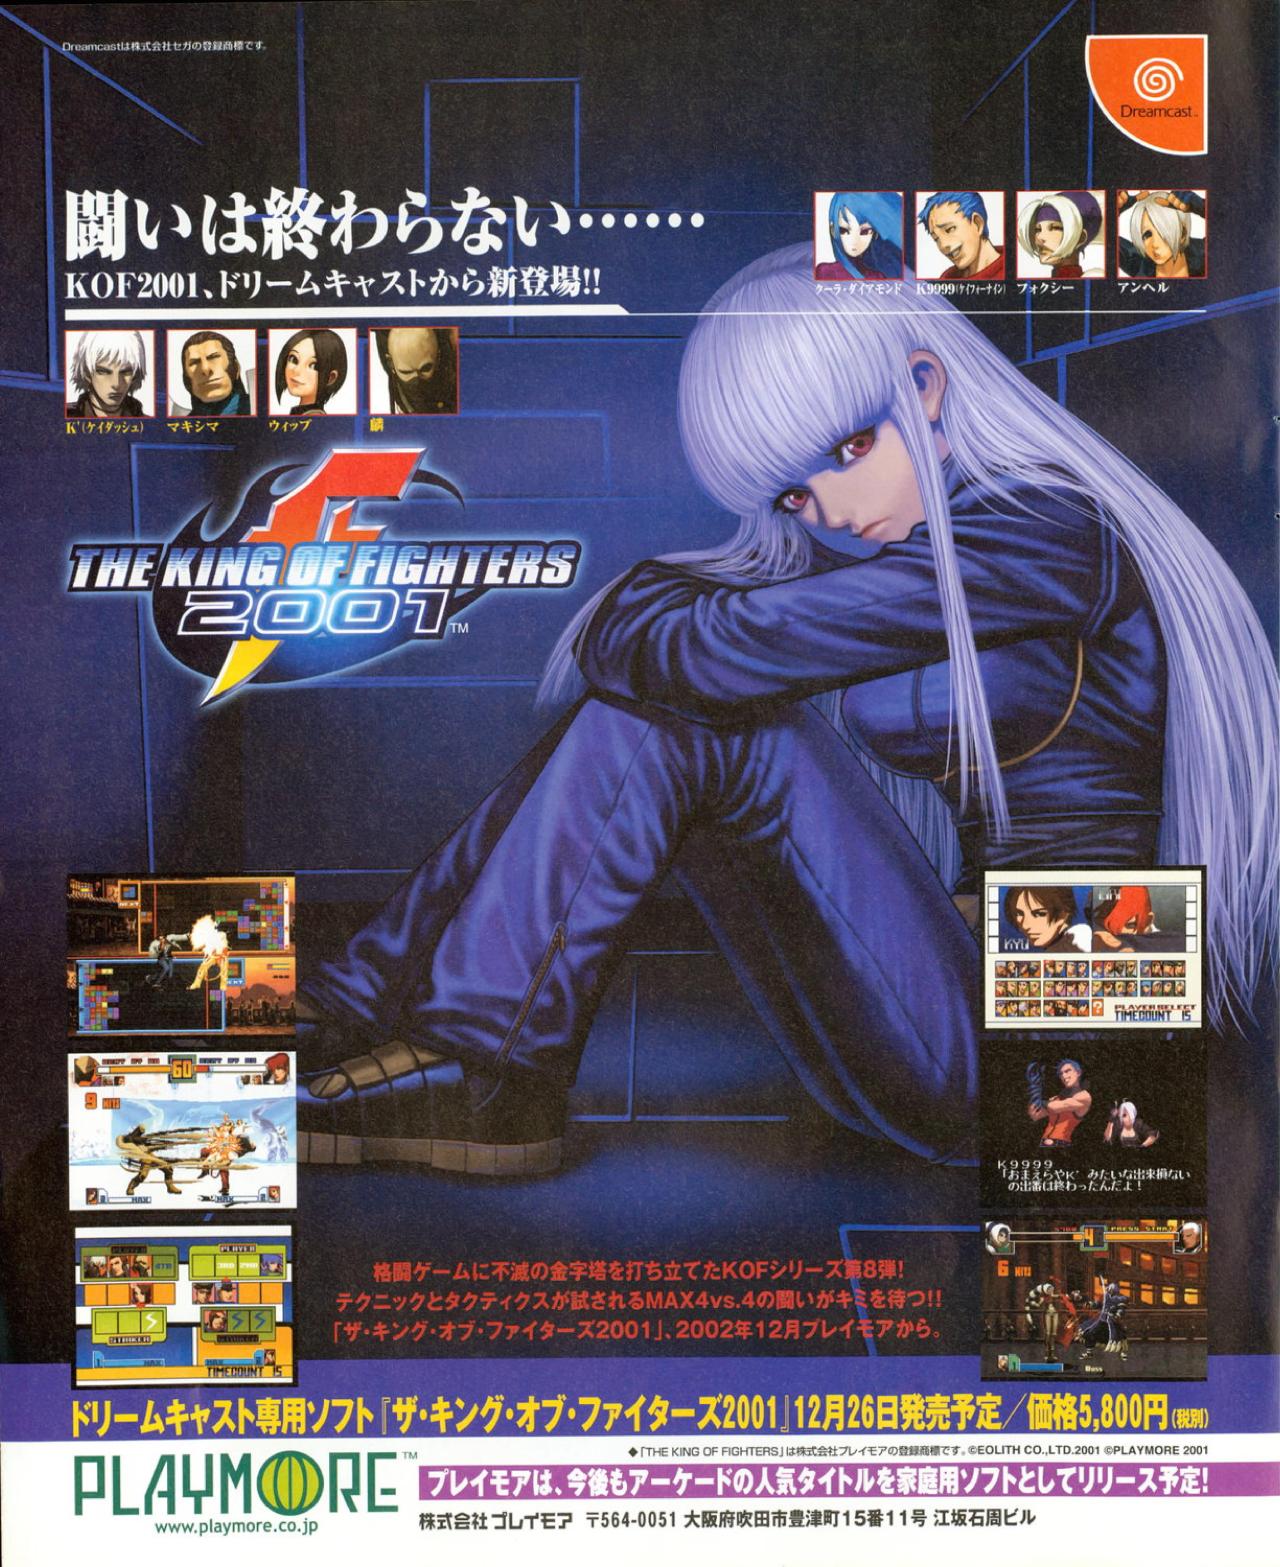 2001 The King of Fighters 2001 for Sega Dreamcast Magazine Ad